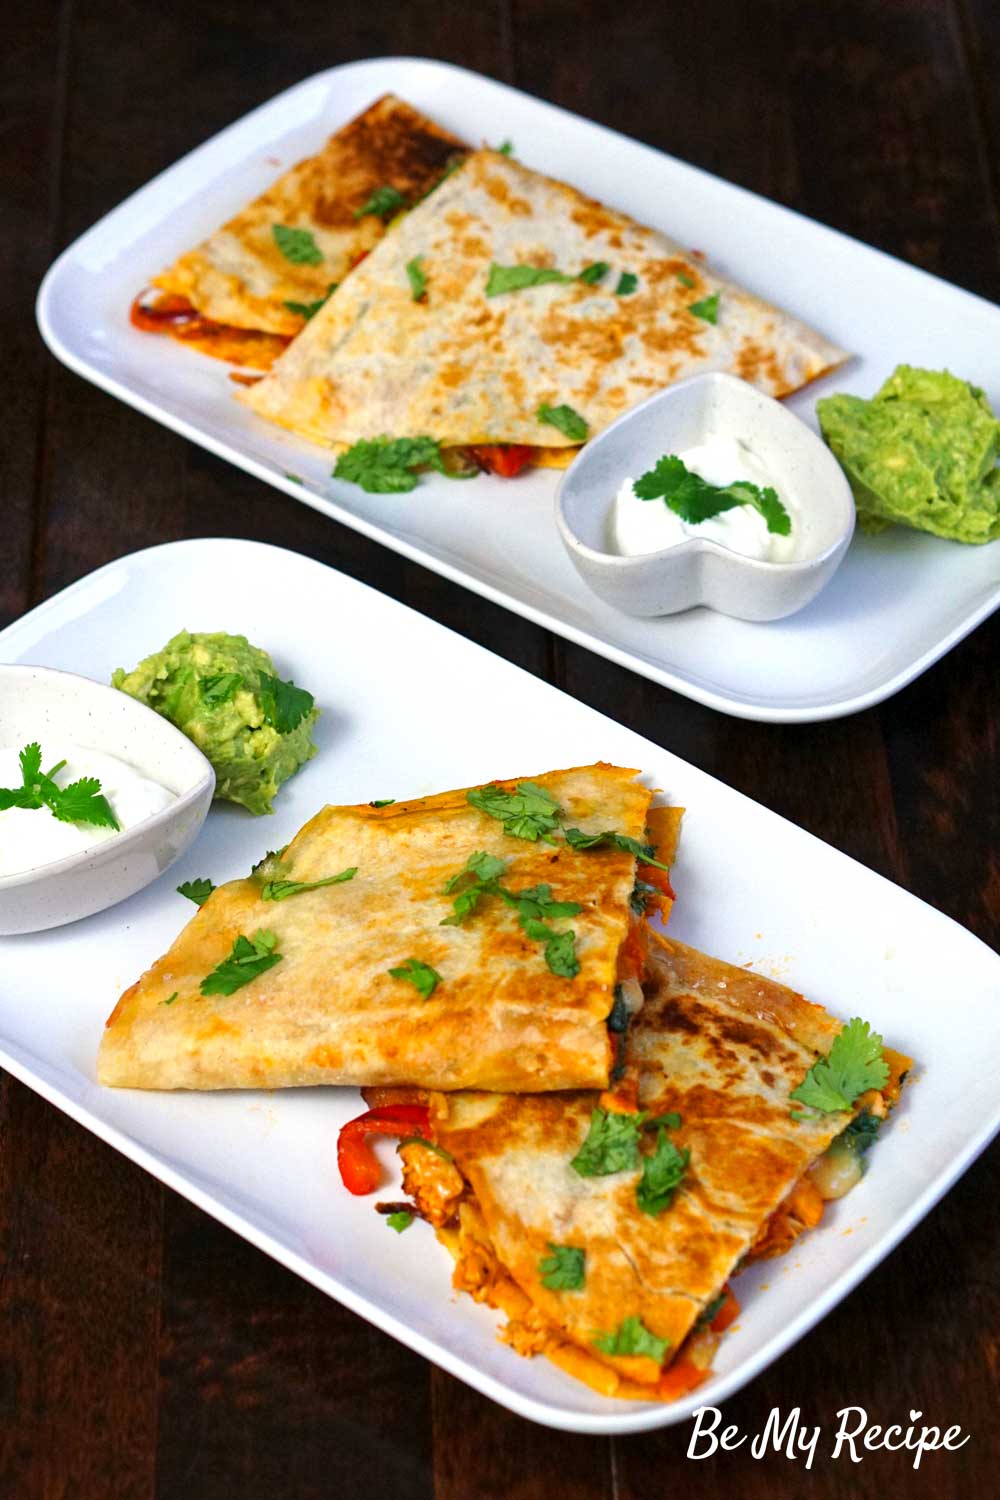 Chicken Quesadillas with Mashed Avocado and Sour Cream